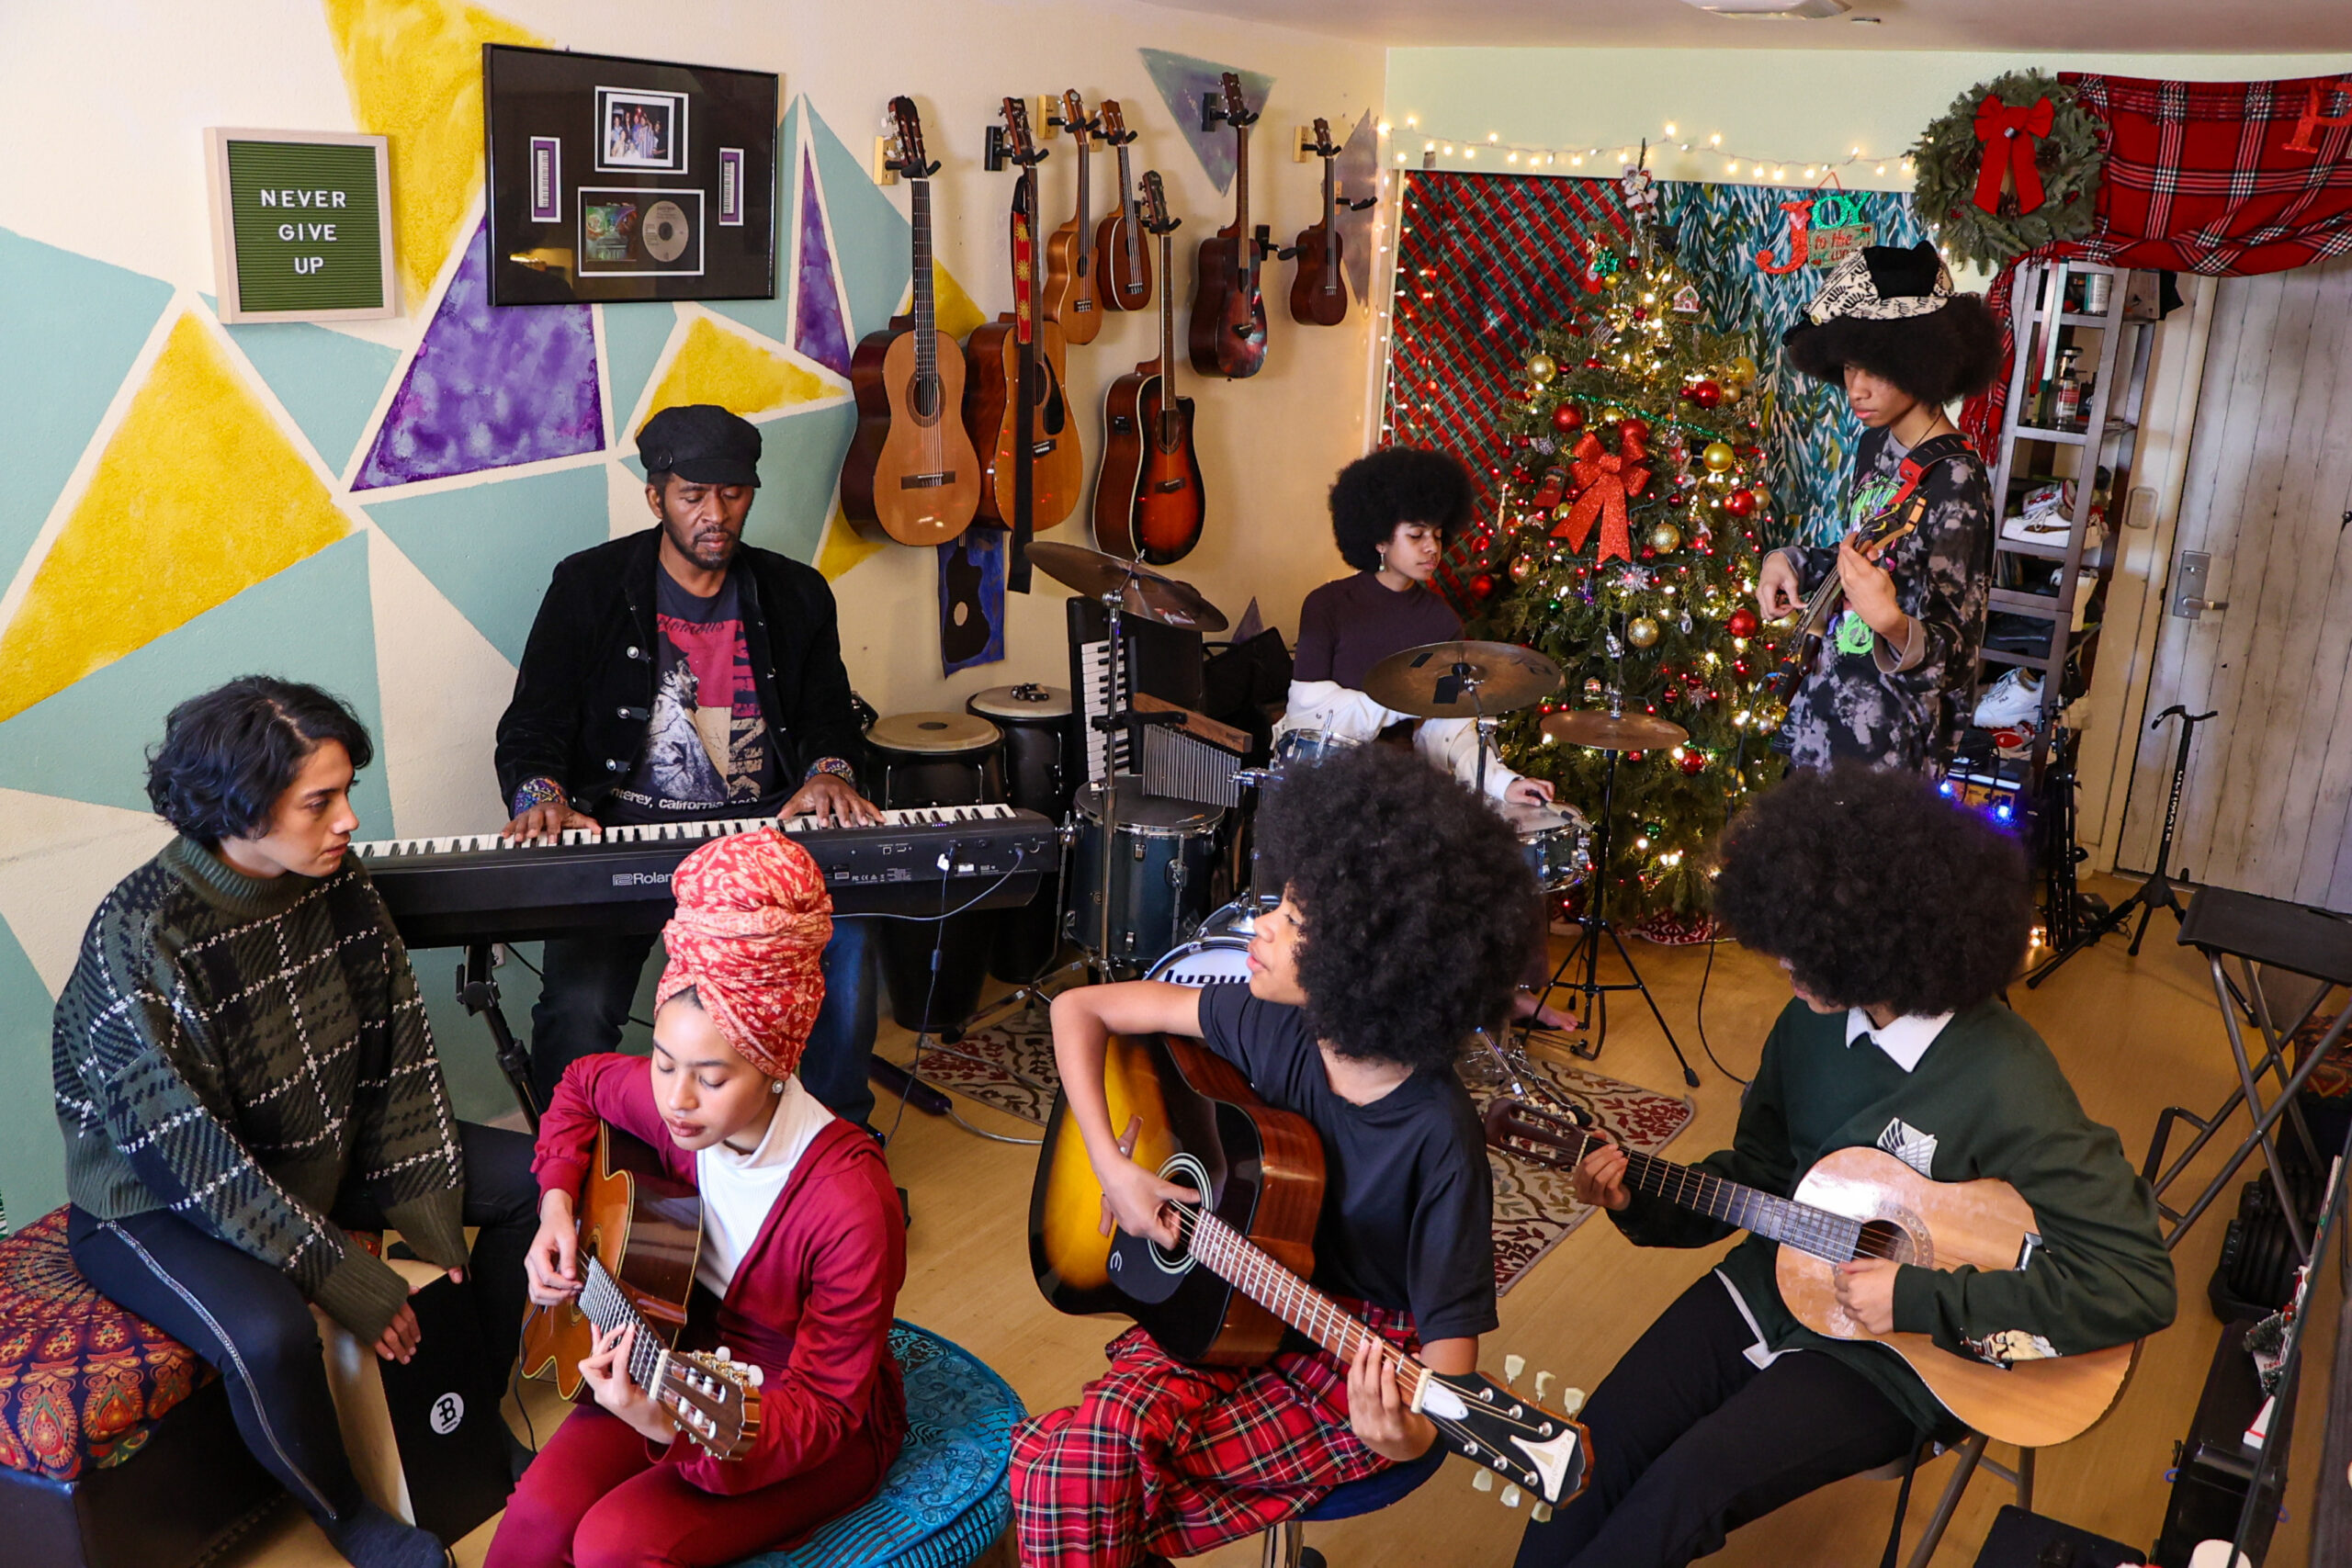 Hitting a High Note: Core Values and Love of Music Inspire this Talented SF Family Band